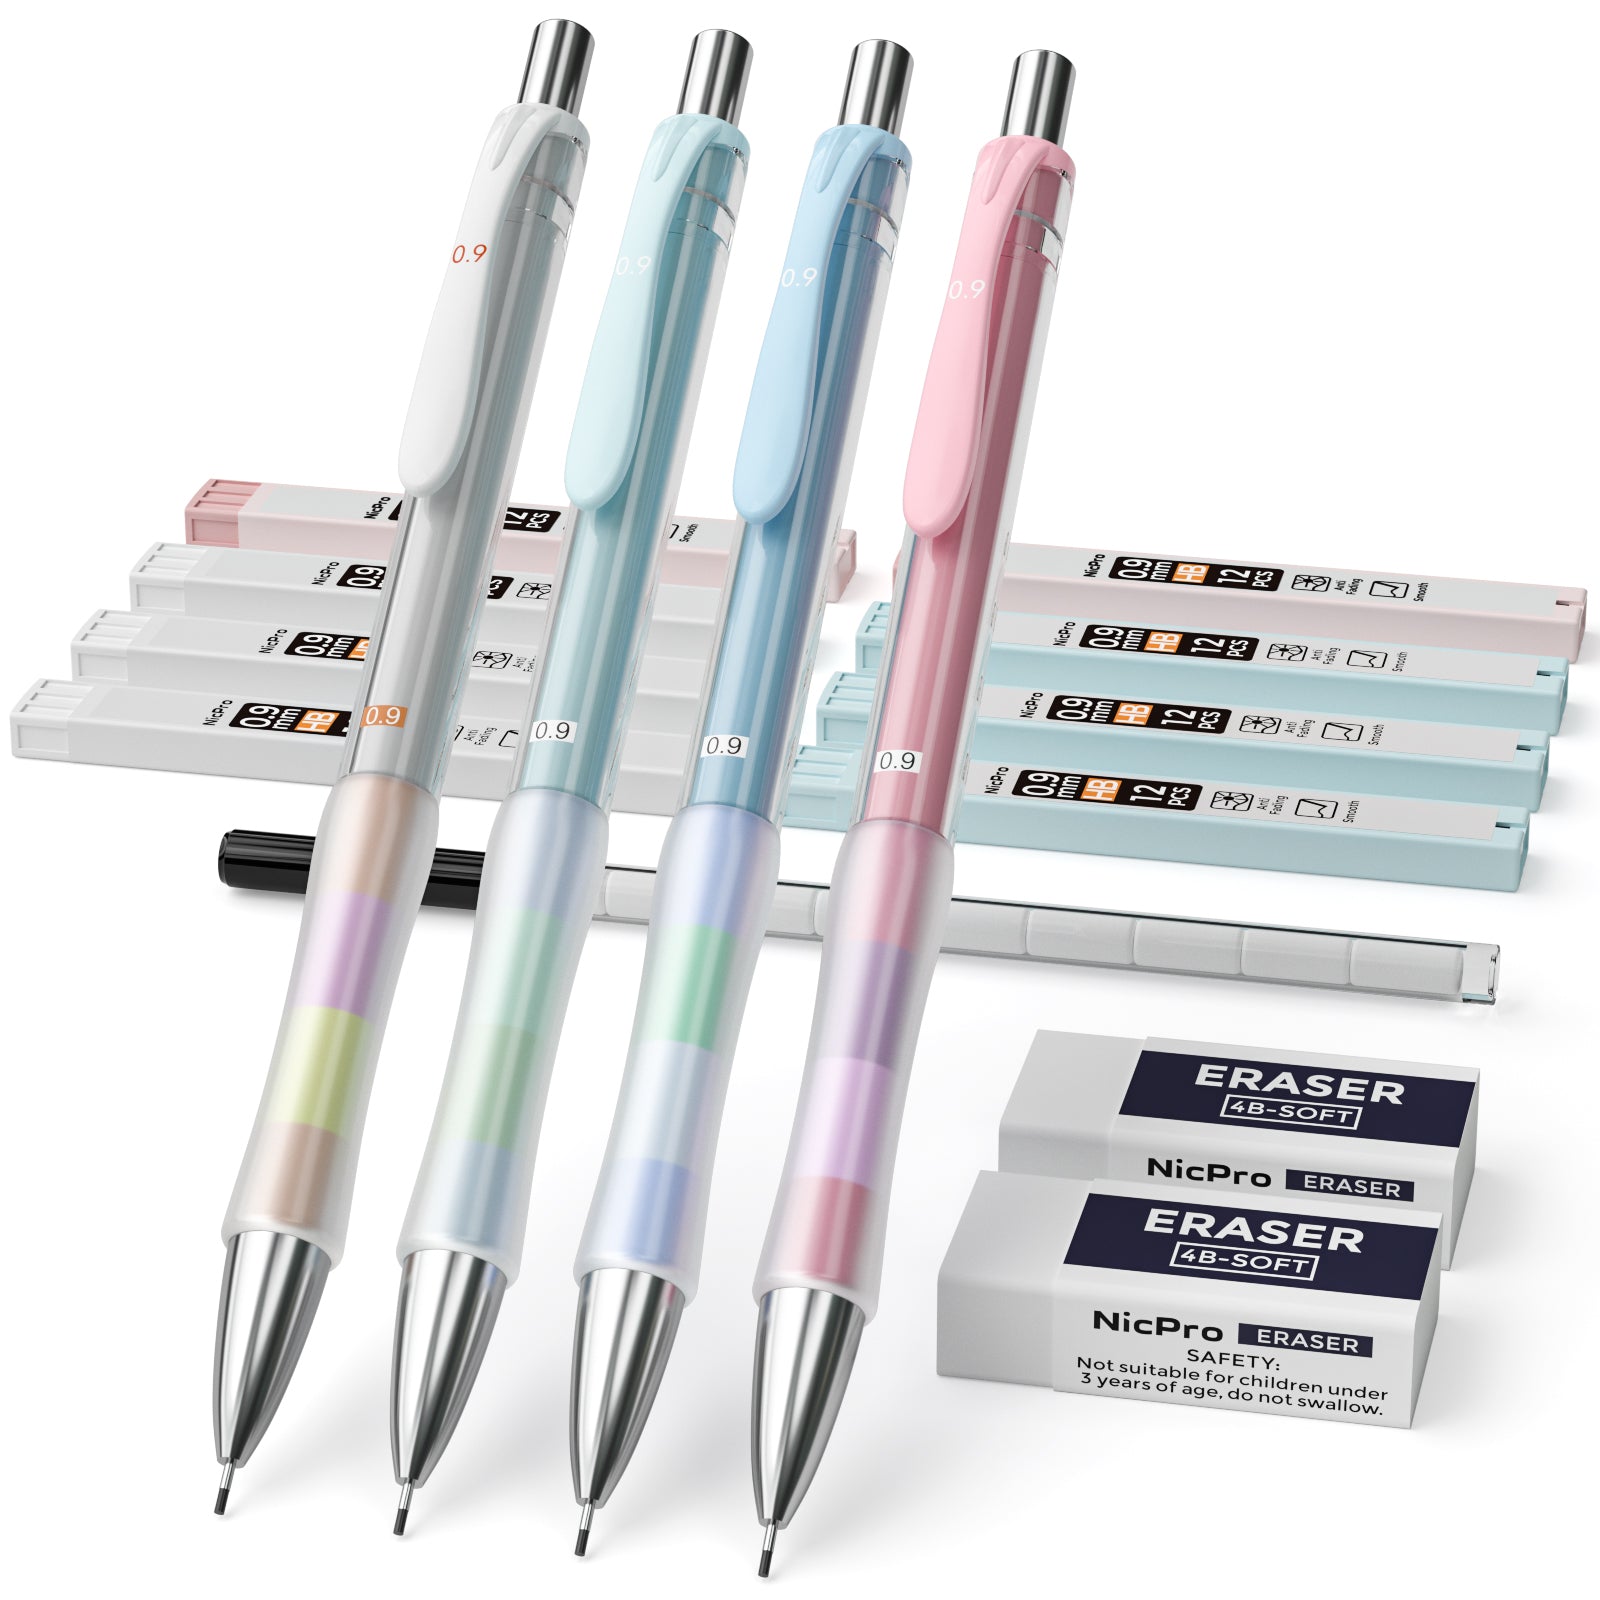 Mr. Pen- Pastel Mechanical Pencil Set with Lead and Eraser Refills, 5  Sizes, 0.3, 0.5, 0.7, 0.9, 2mm, Mechanical Pencils for Drawing and  Sketching